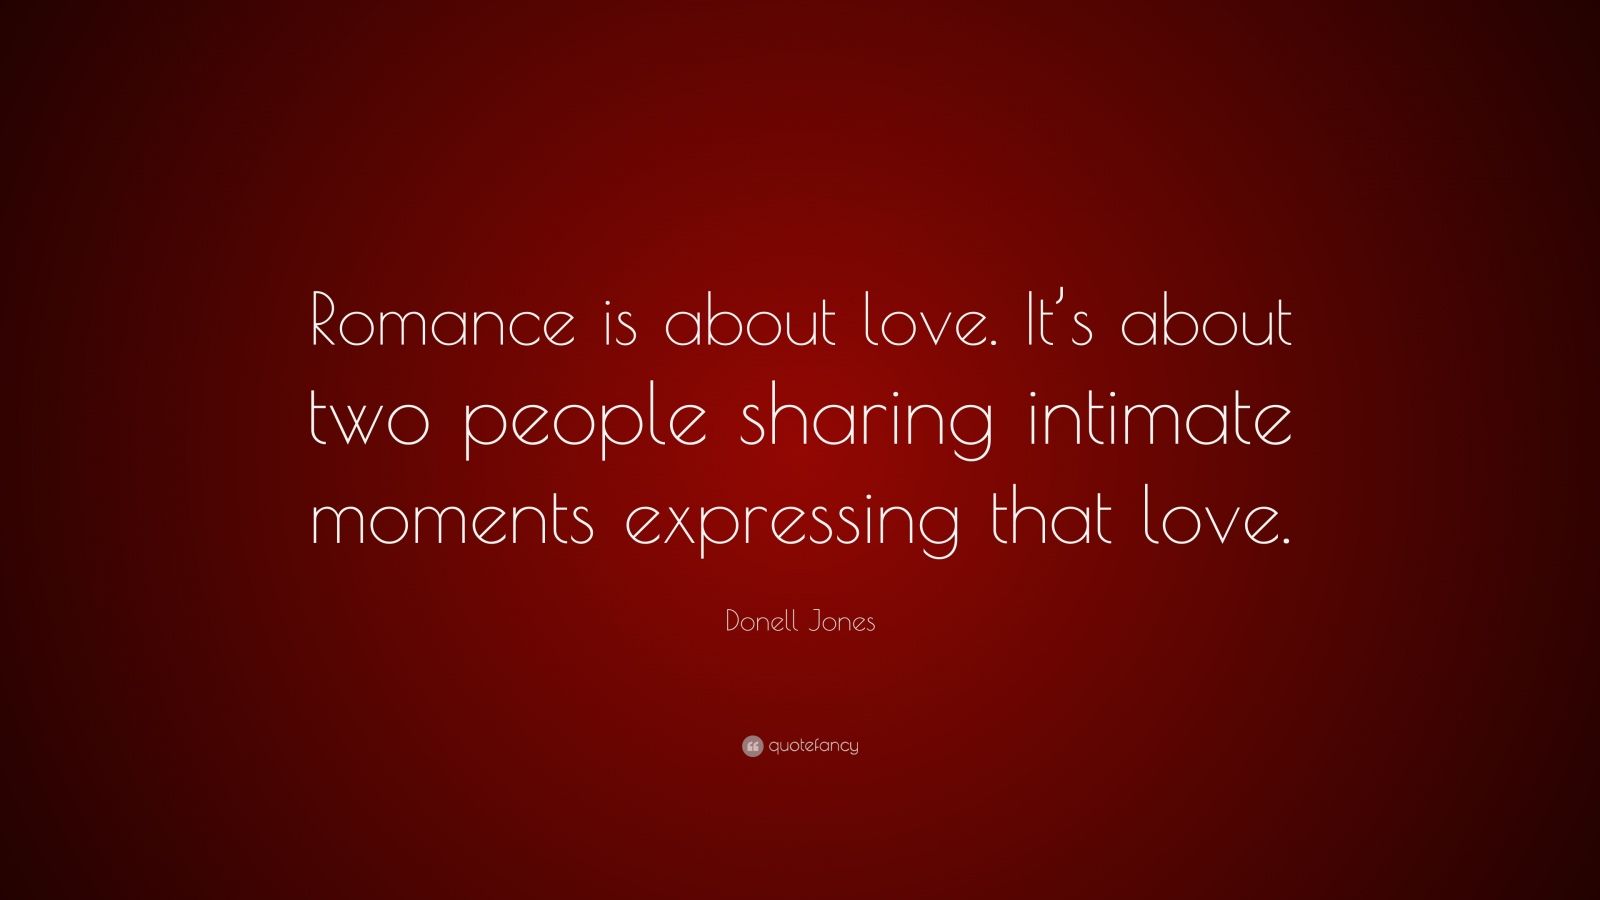 Love Jones Quotes Romance Is About The Possibility Donell jones quotes wallpapers quotefancy